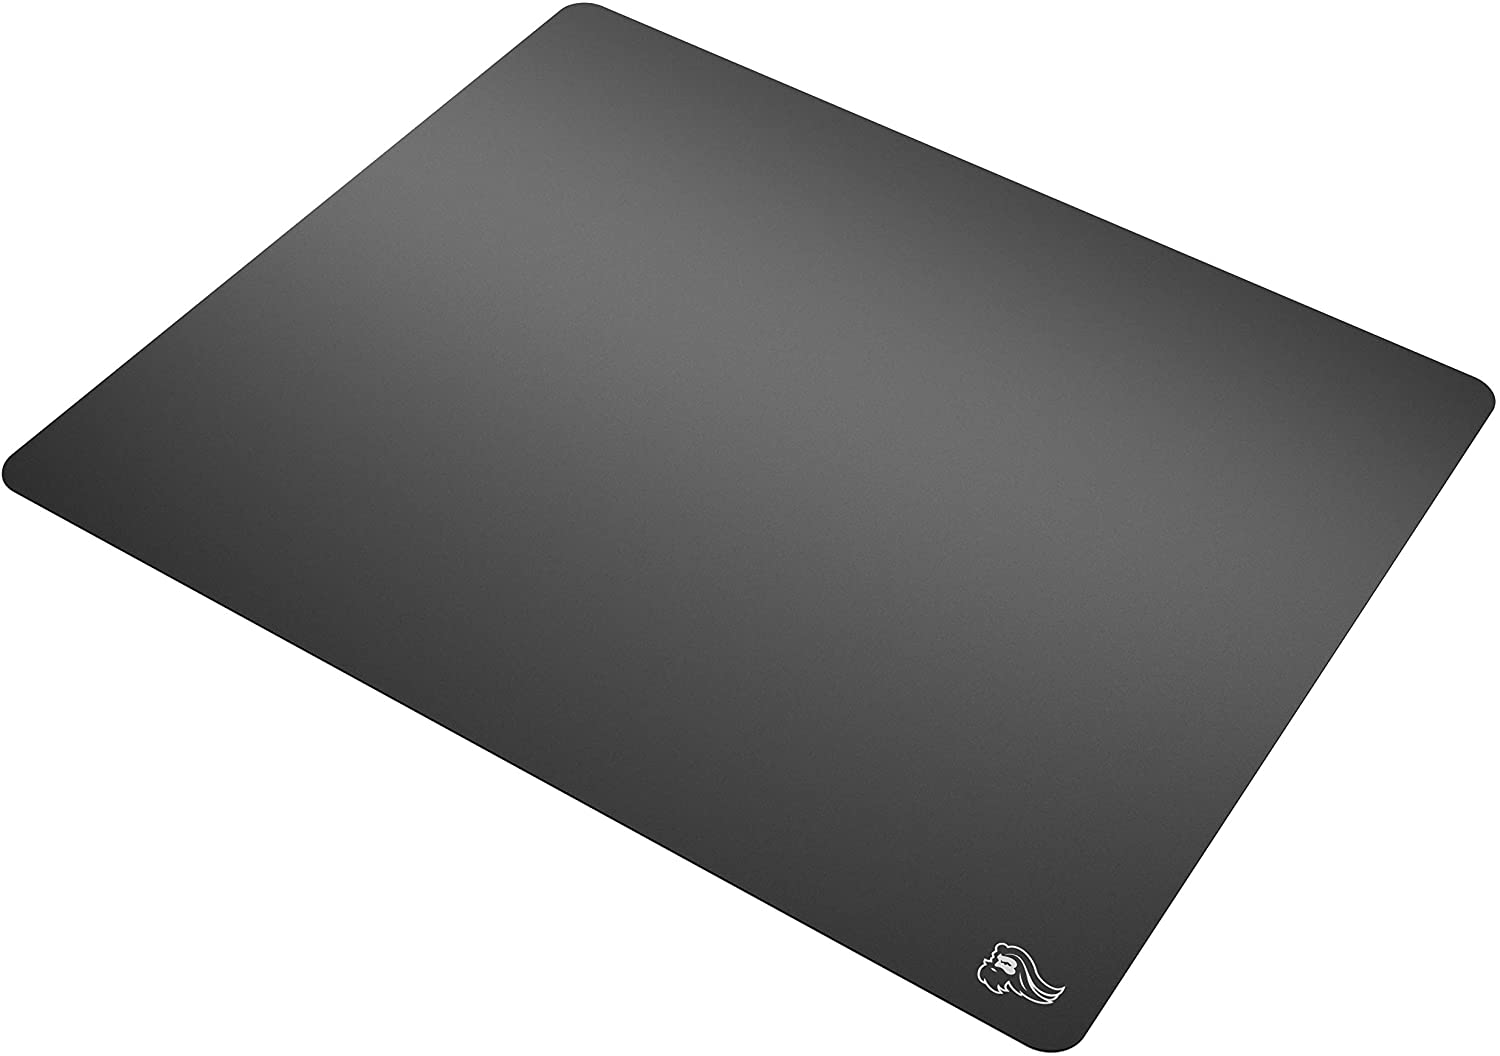 Glorious PC Gaming Race Helios Mouse Pad - XL